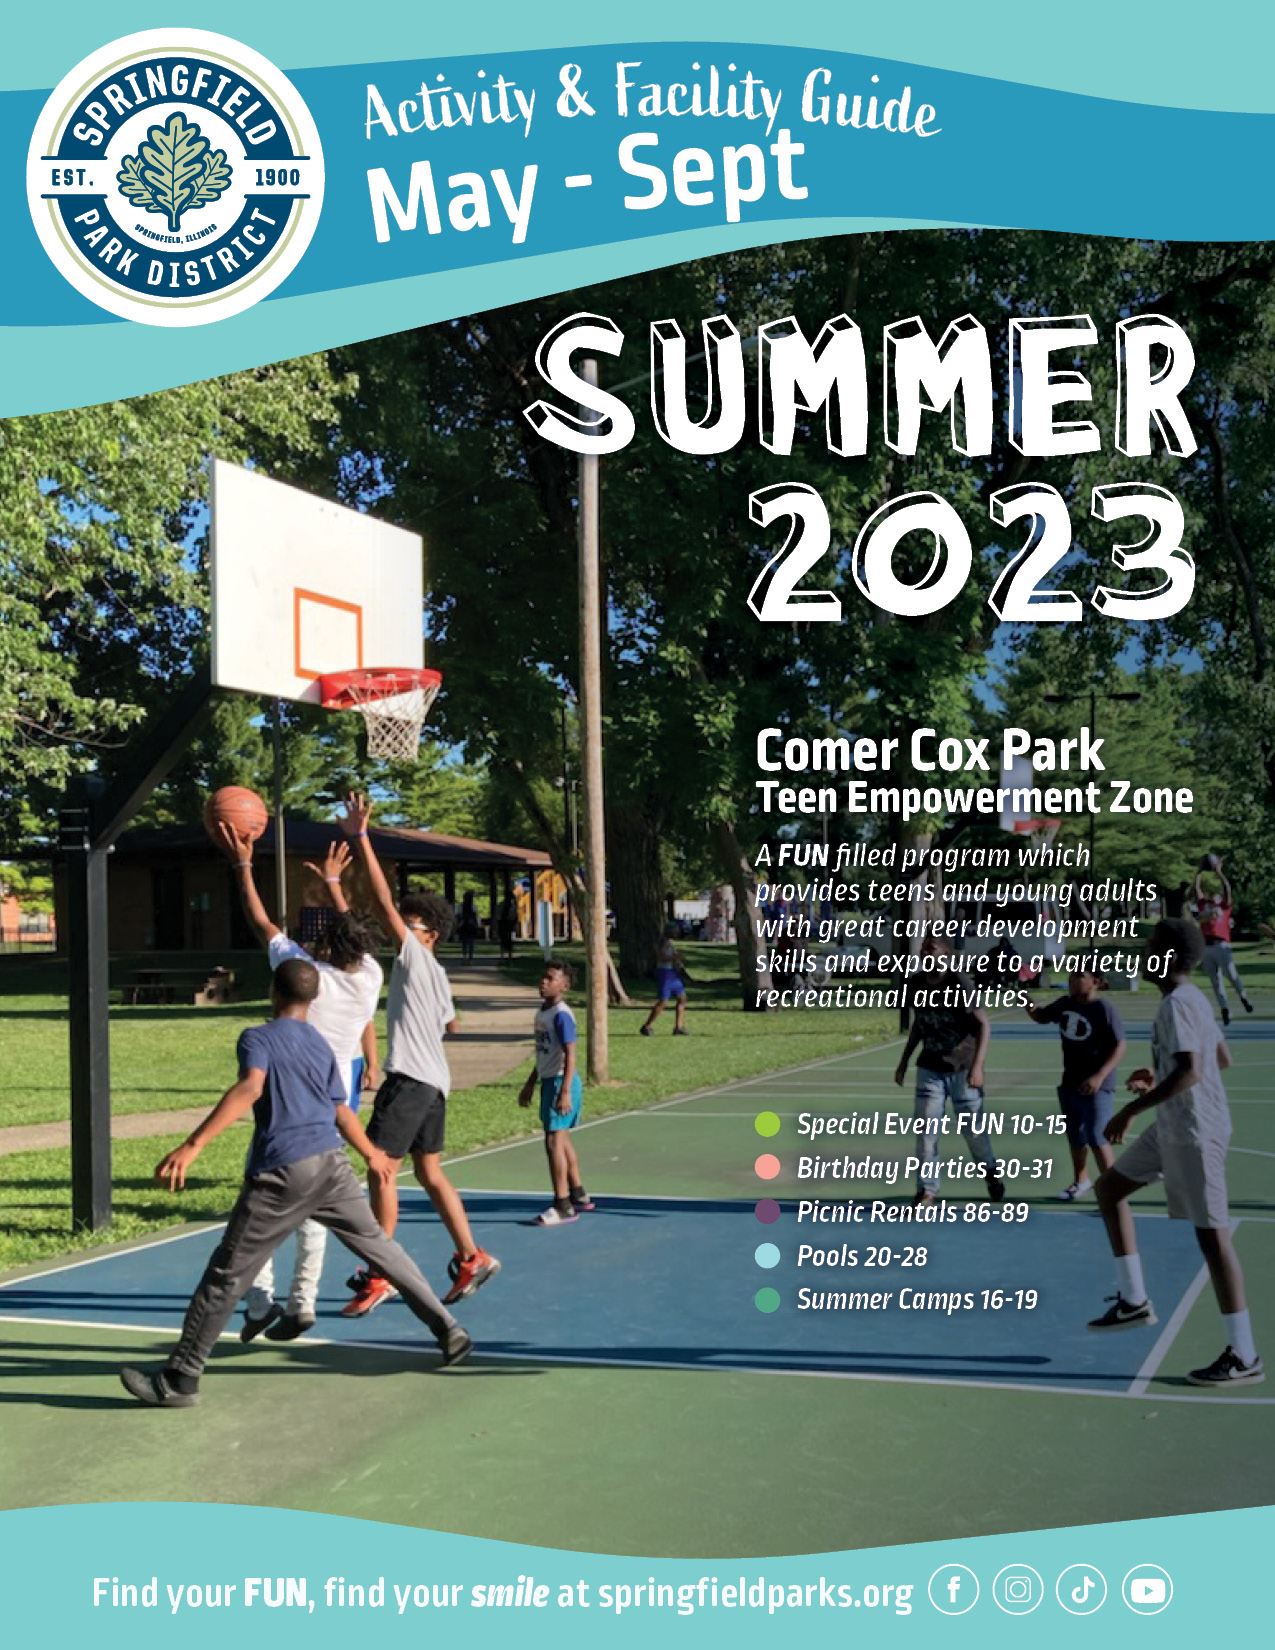 Cover Image for the Park District 2023 Summer Activity Guide